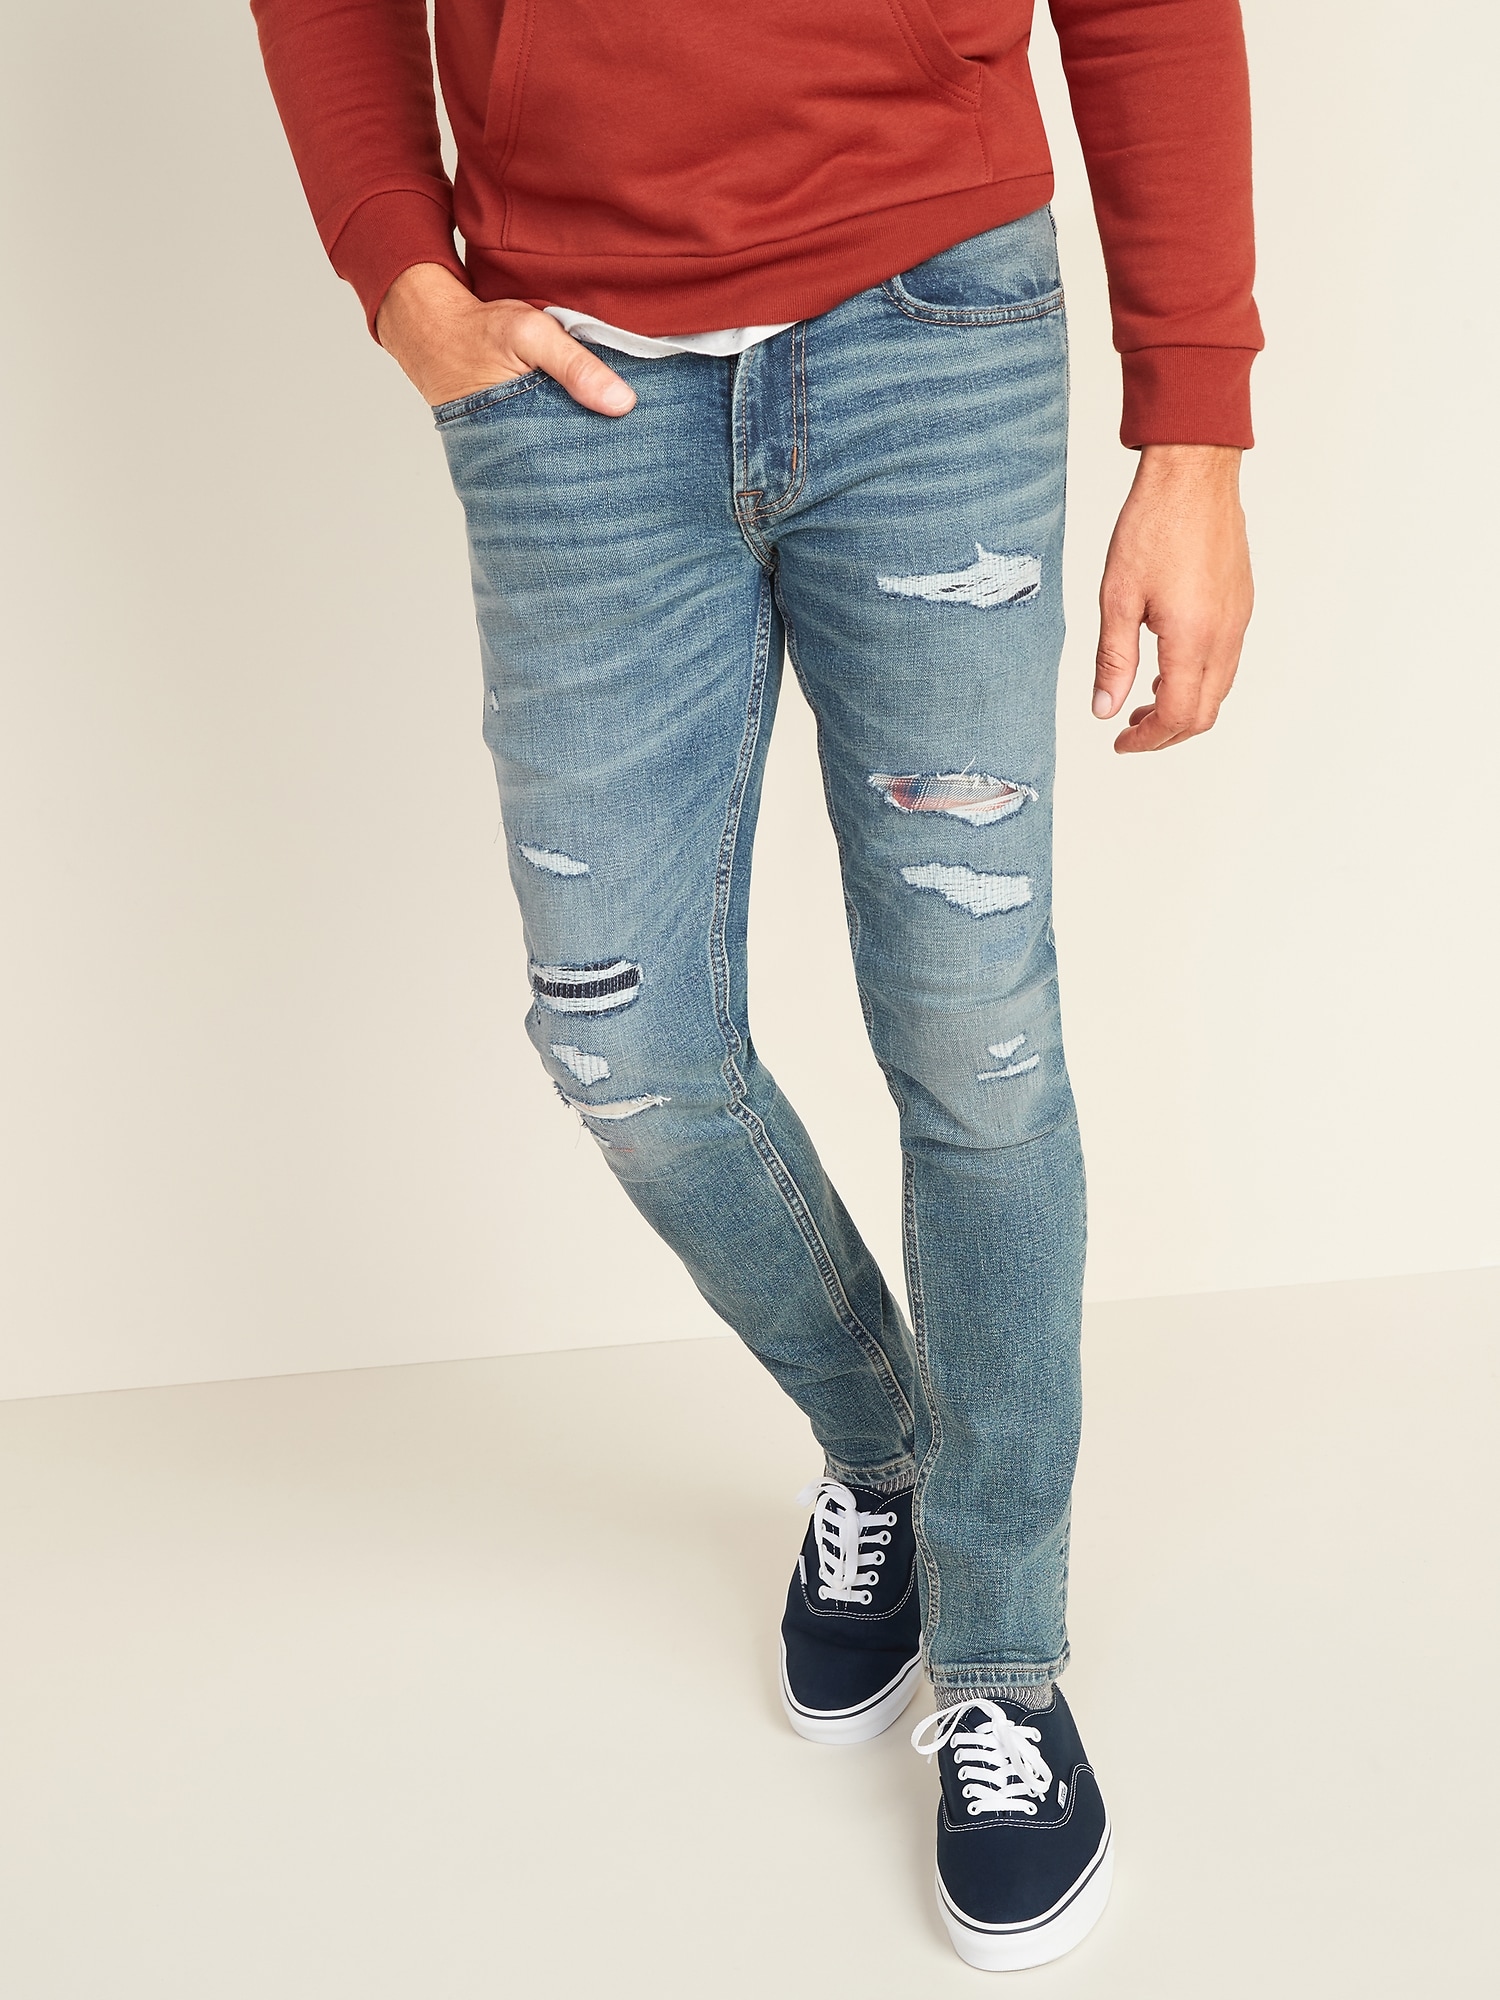 old navy stretch jeans mens